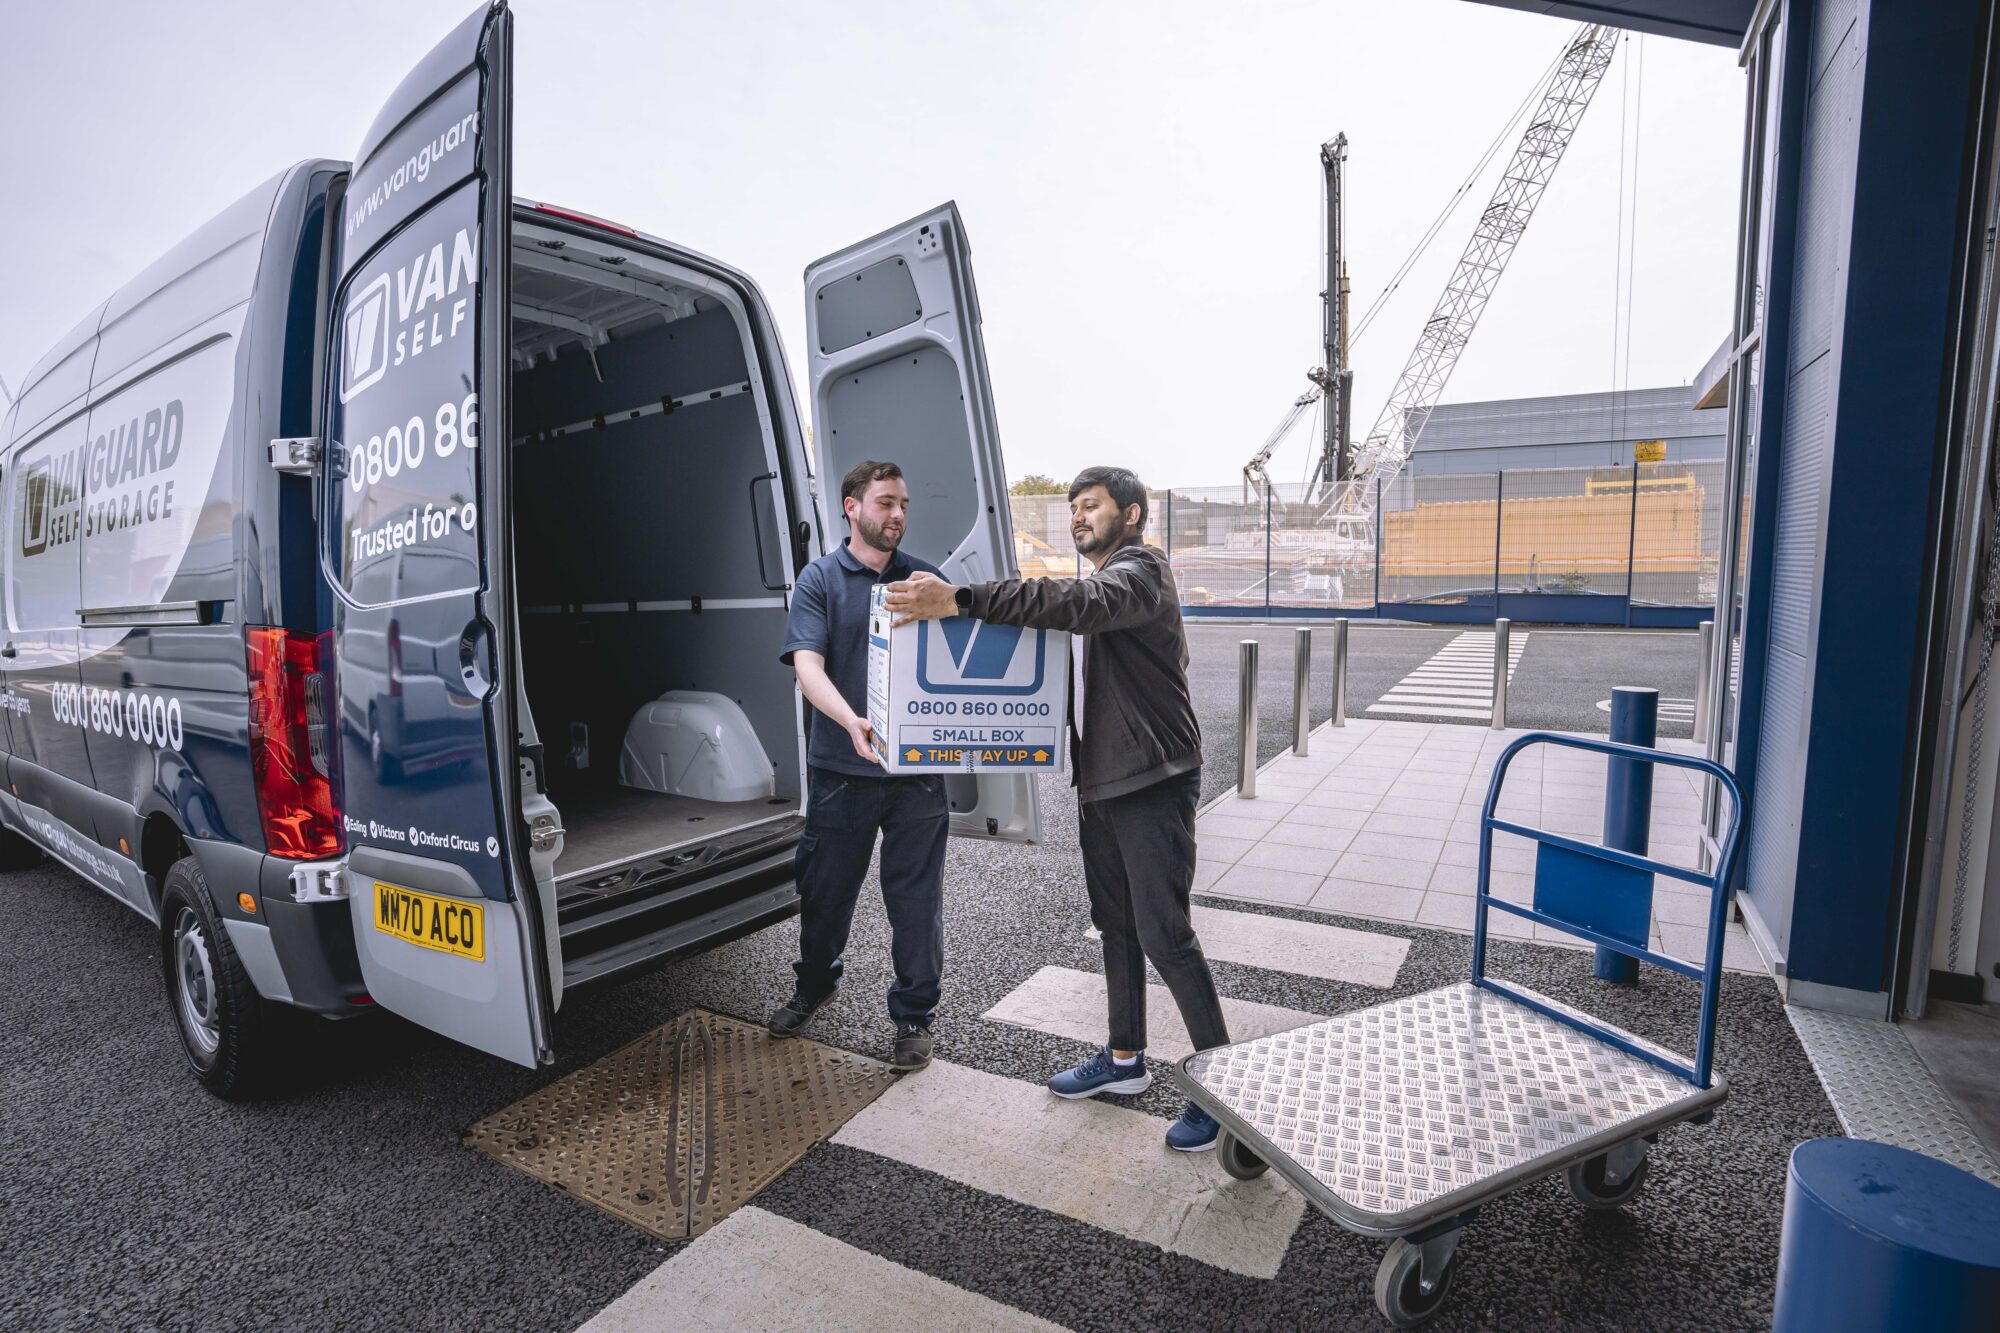 A photo showing a Vanguard employee helping a customer move boxes from a van and onto a trolley.